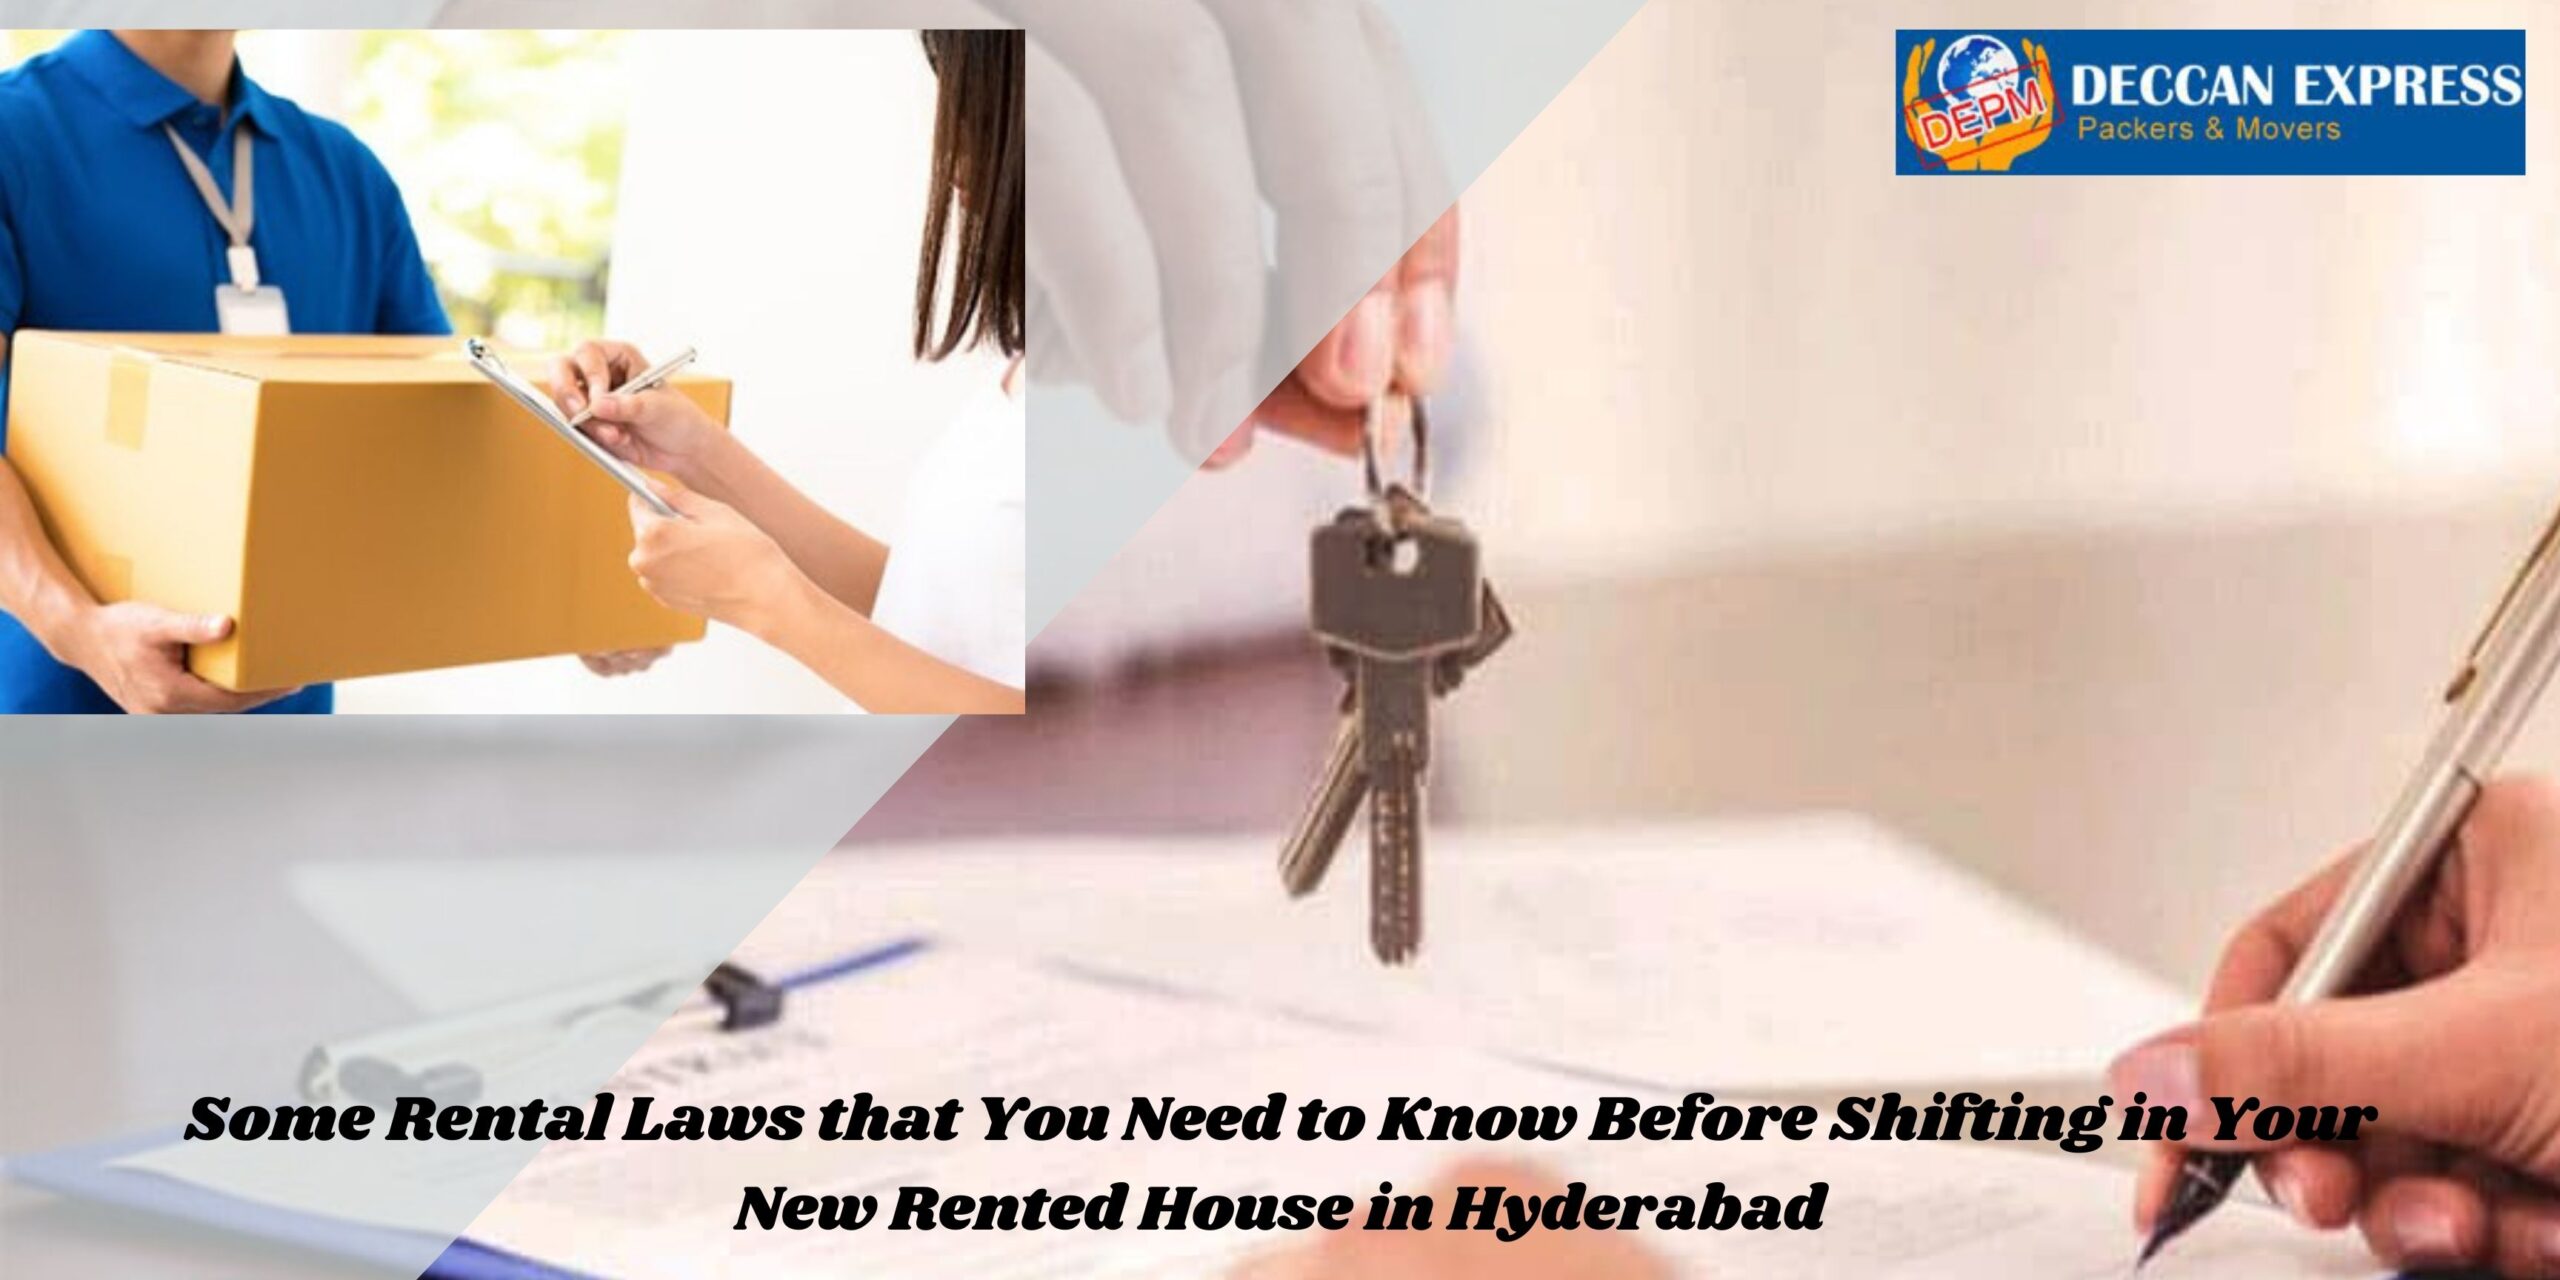 Some Rental Laws that You Need to Know Before Shifting in Your New Rented House in Hyderabad